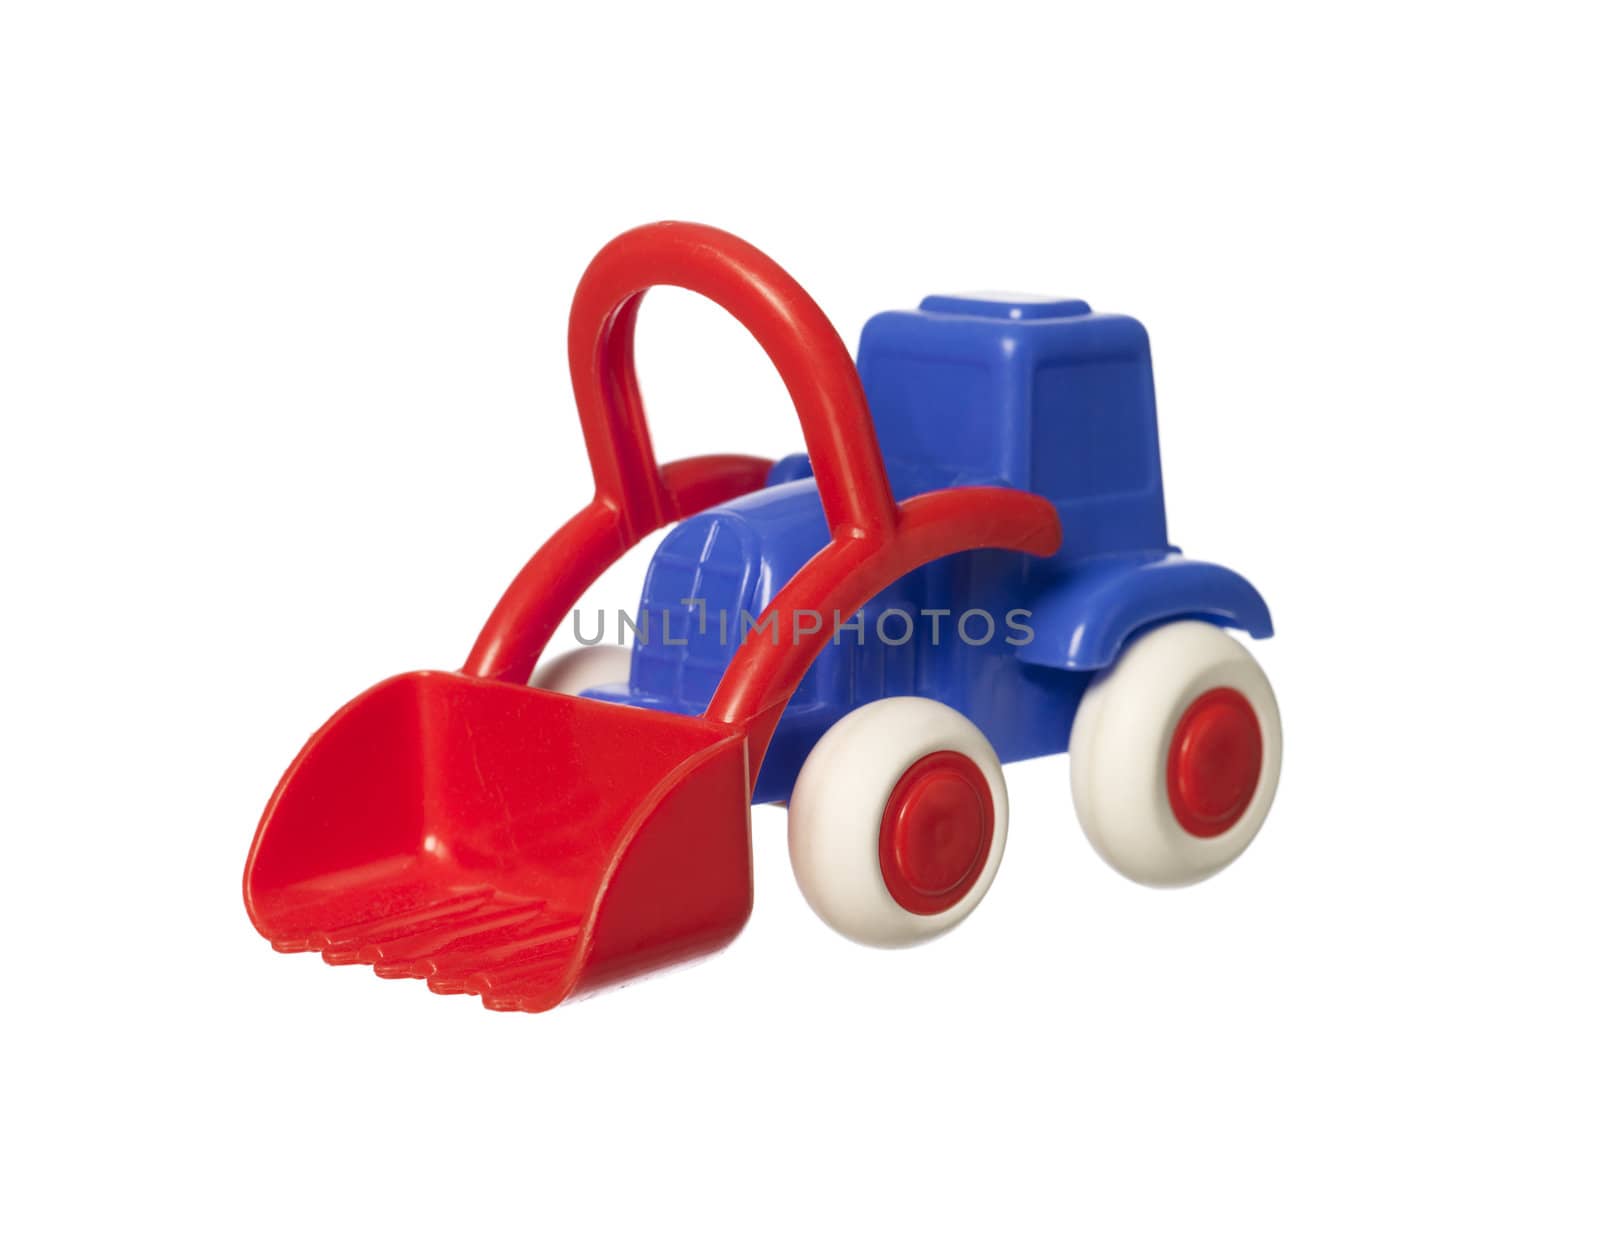 Toy tractor by gemenacom